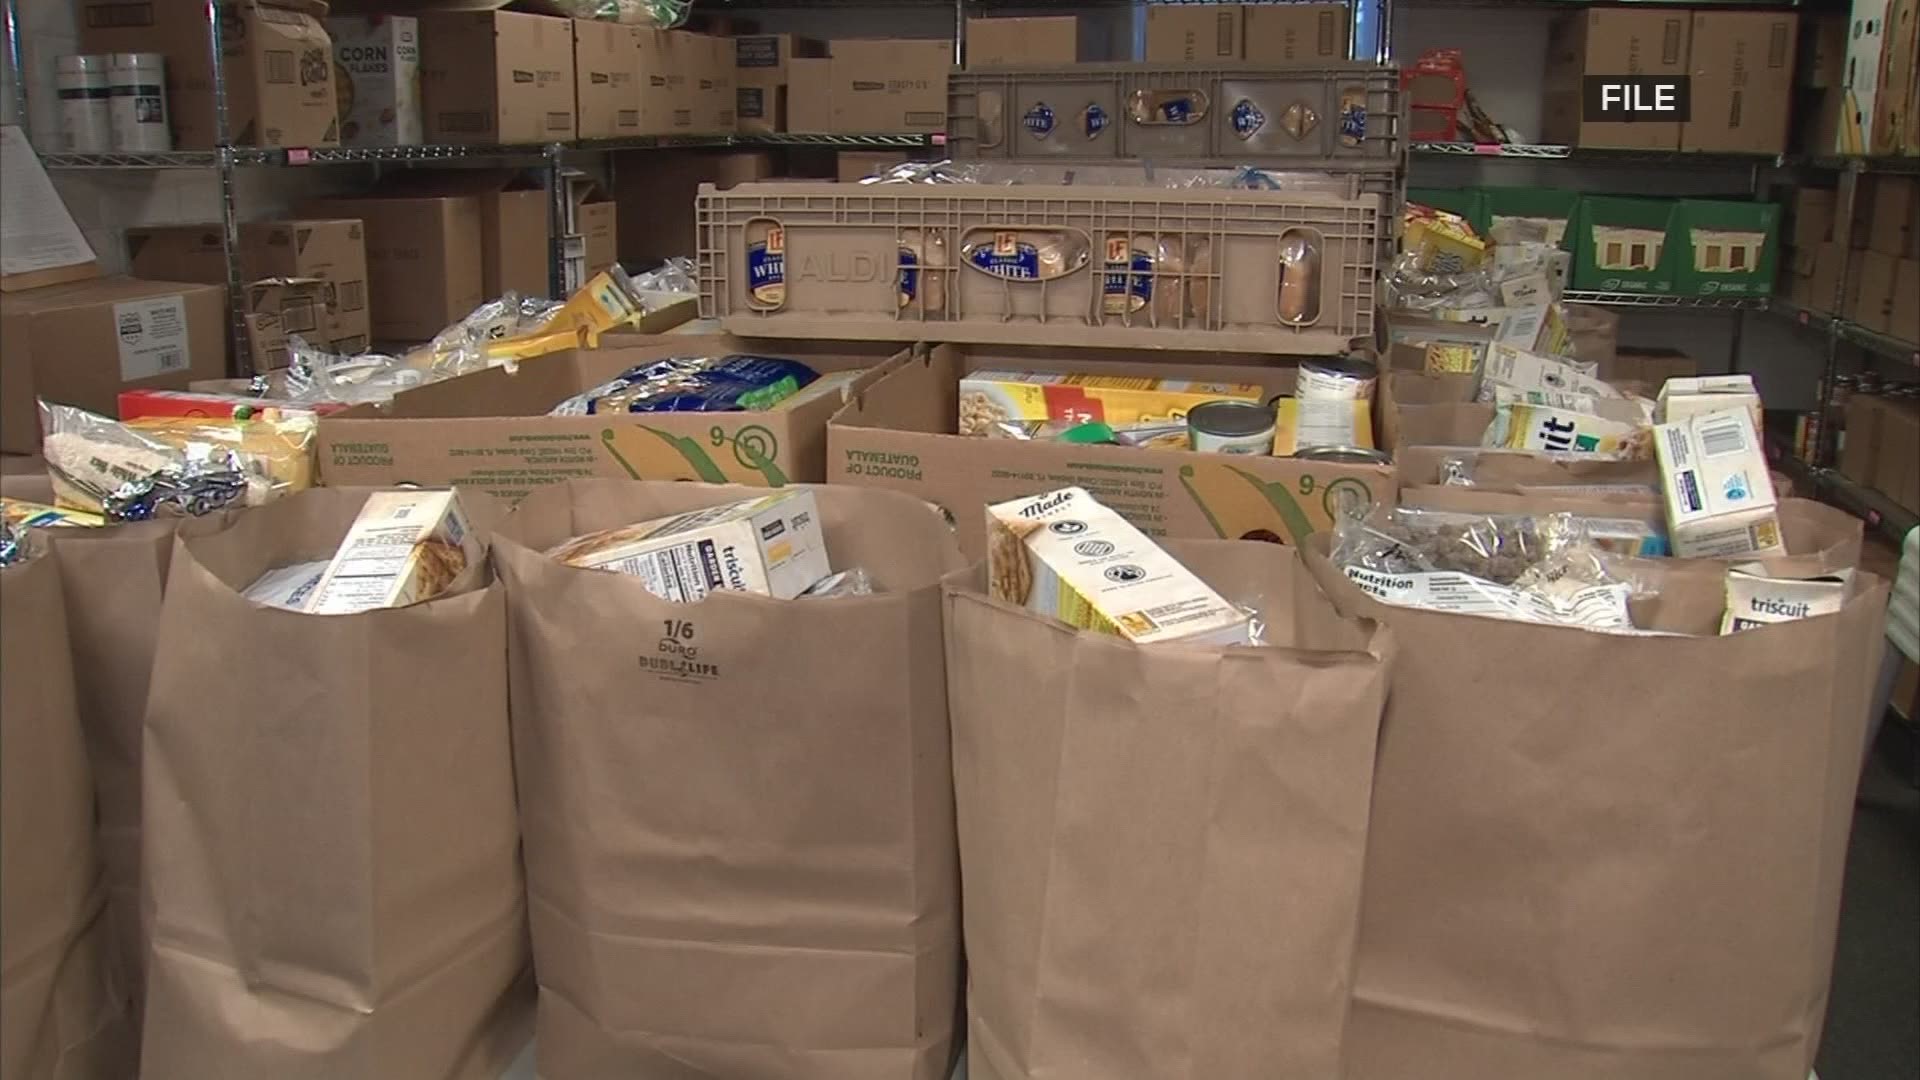 Athens County native Joe Burrow's impact on his community has brought in hundreds of thousands of dollars for the local food pantry.